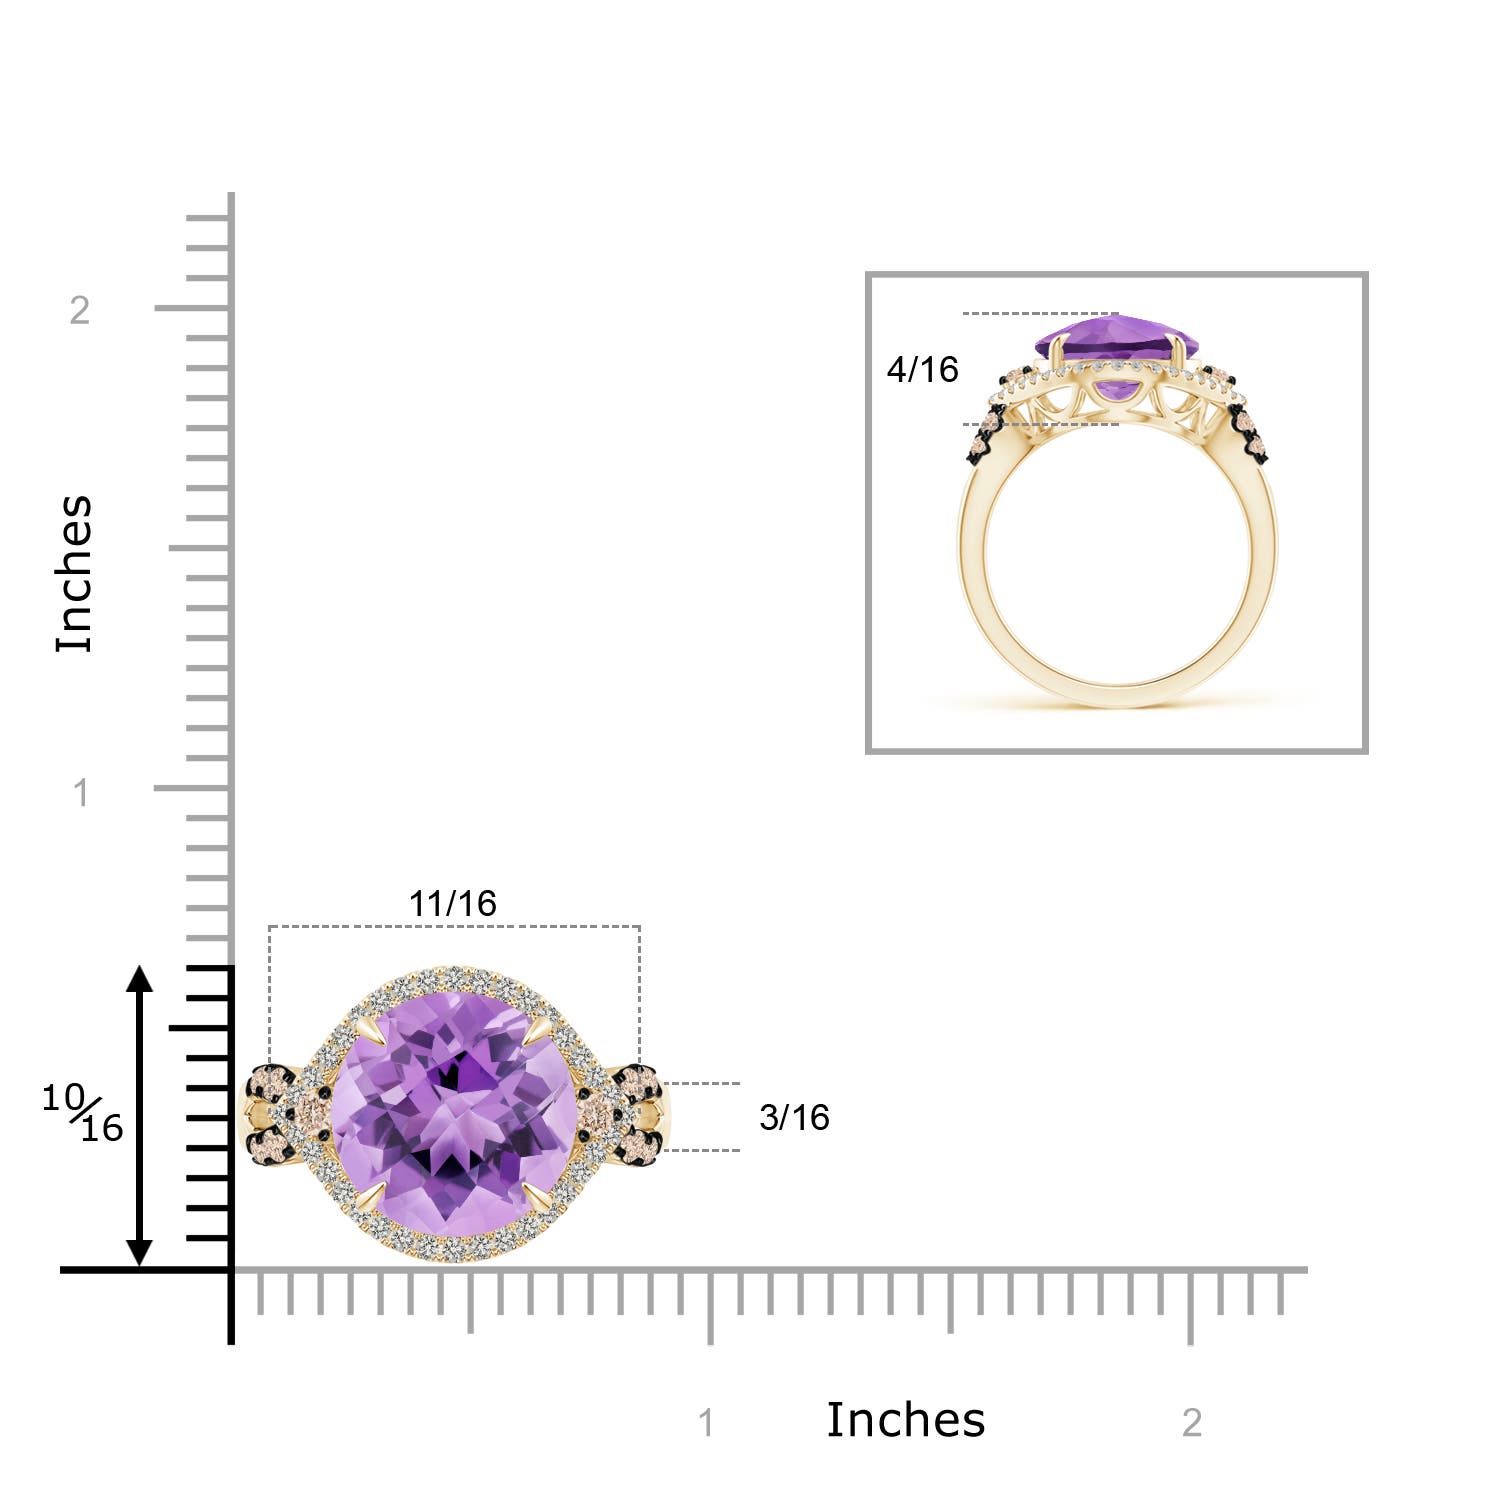 A - Amethyst / 6.4 CT / 14 KT Yellow Gold